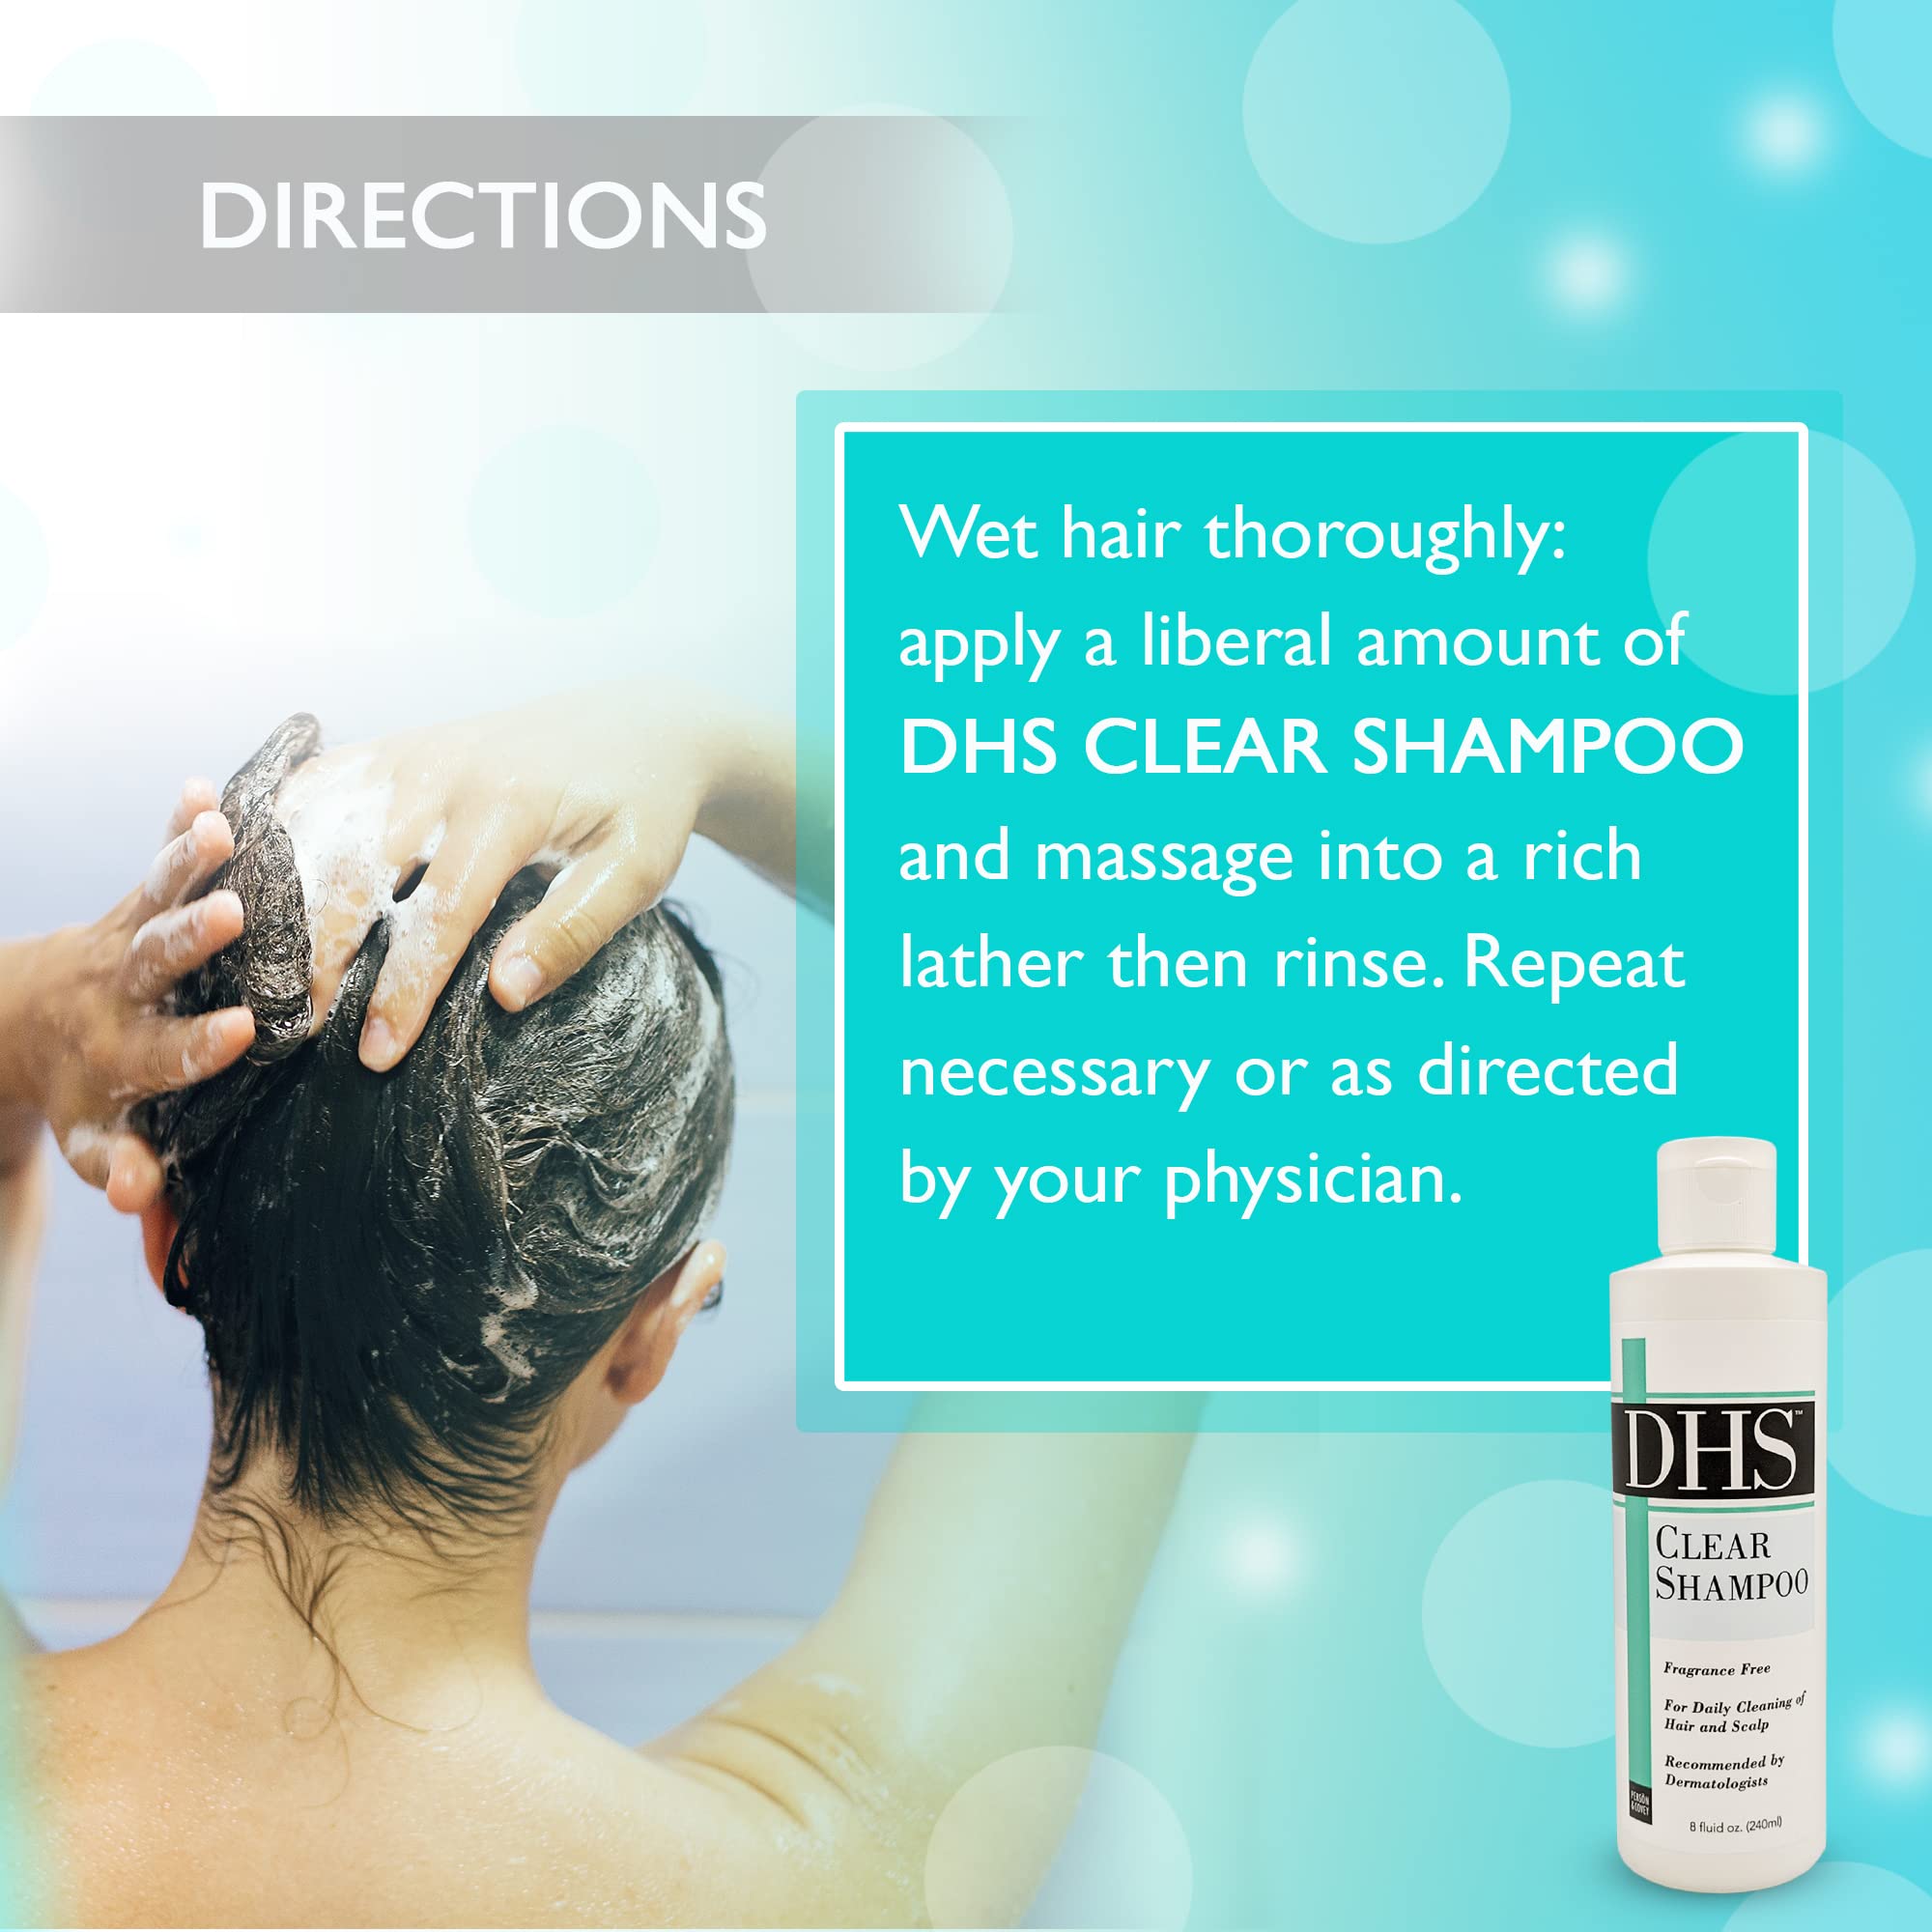 DHS Clear Shampoo - Women’s and Men’s Shampoo for Sensitive Skin/Unscented Cleansing Shampoo Cleans Hair and Treats Dry Scalp/Irritant-free, Paraben-free, Fragrance-free, and Dye-free / 8oz